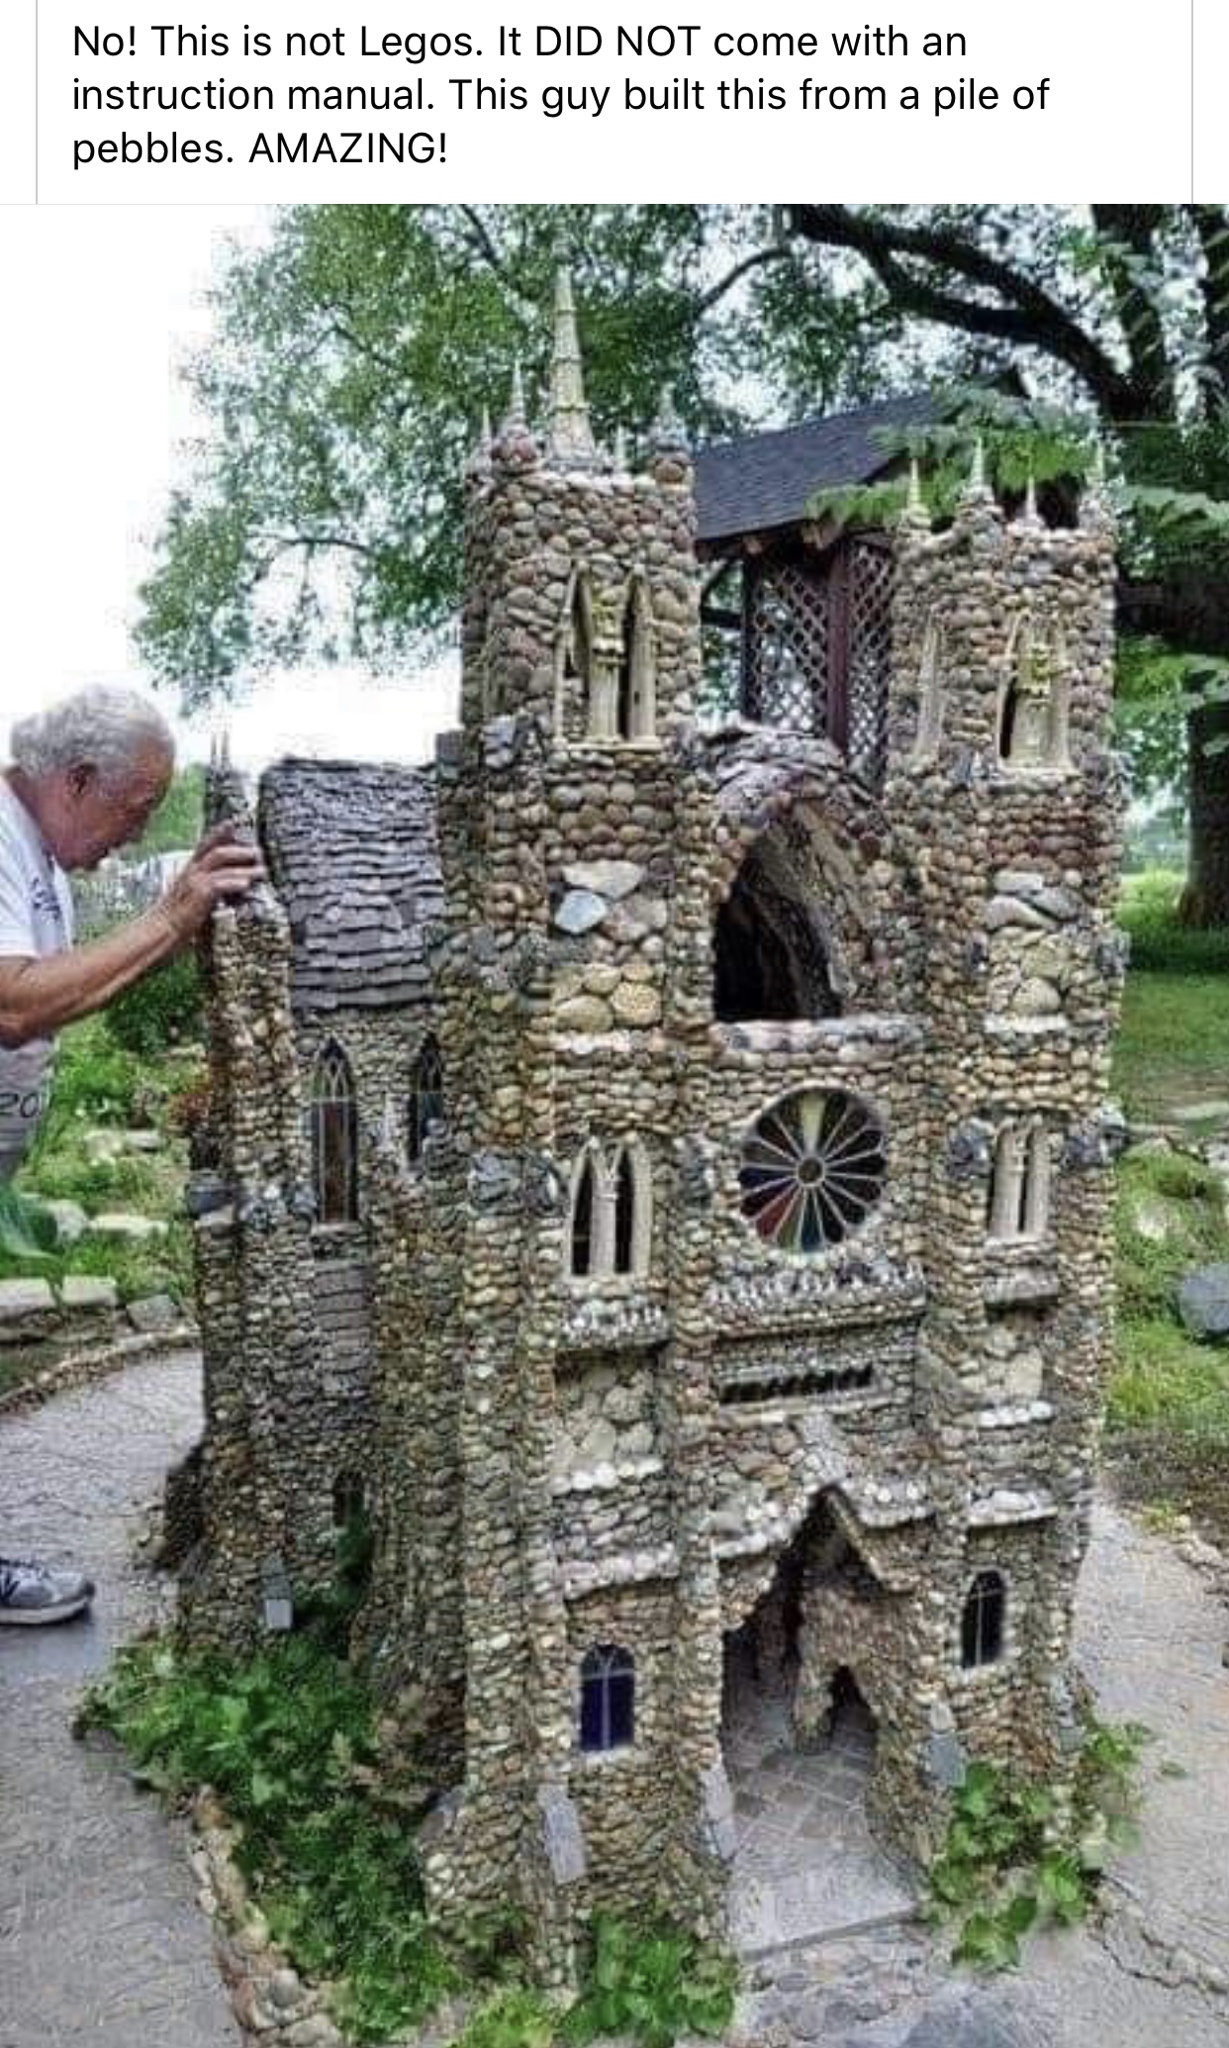 rock garden calhoun - No! This is not Legos. It Did Not come with an instruction manual. This guy built this from a pile of pebbles. Amazing!